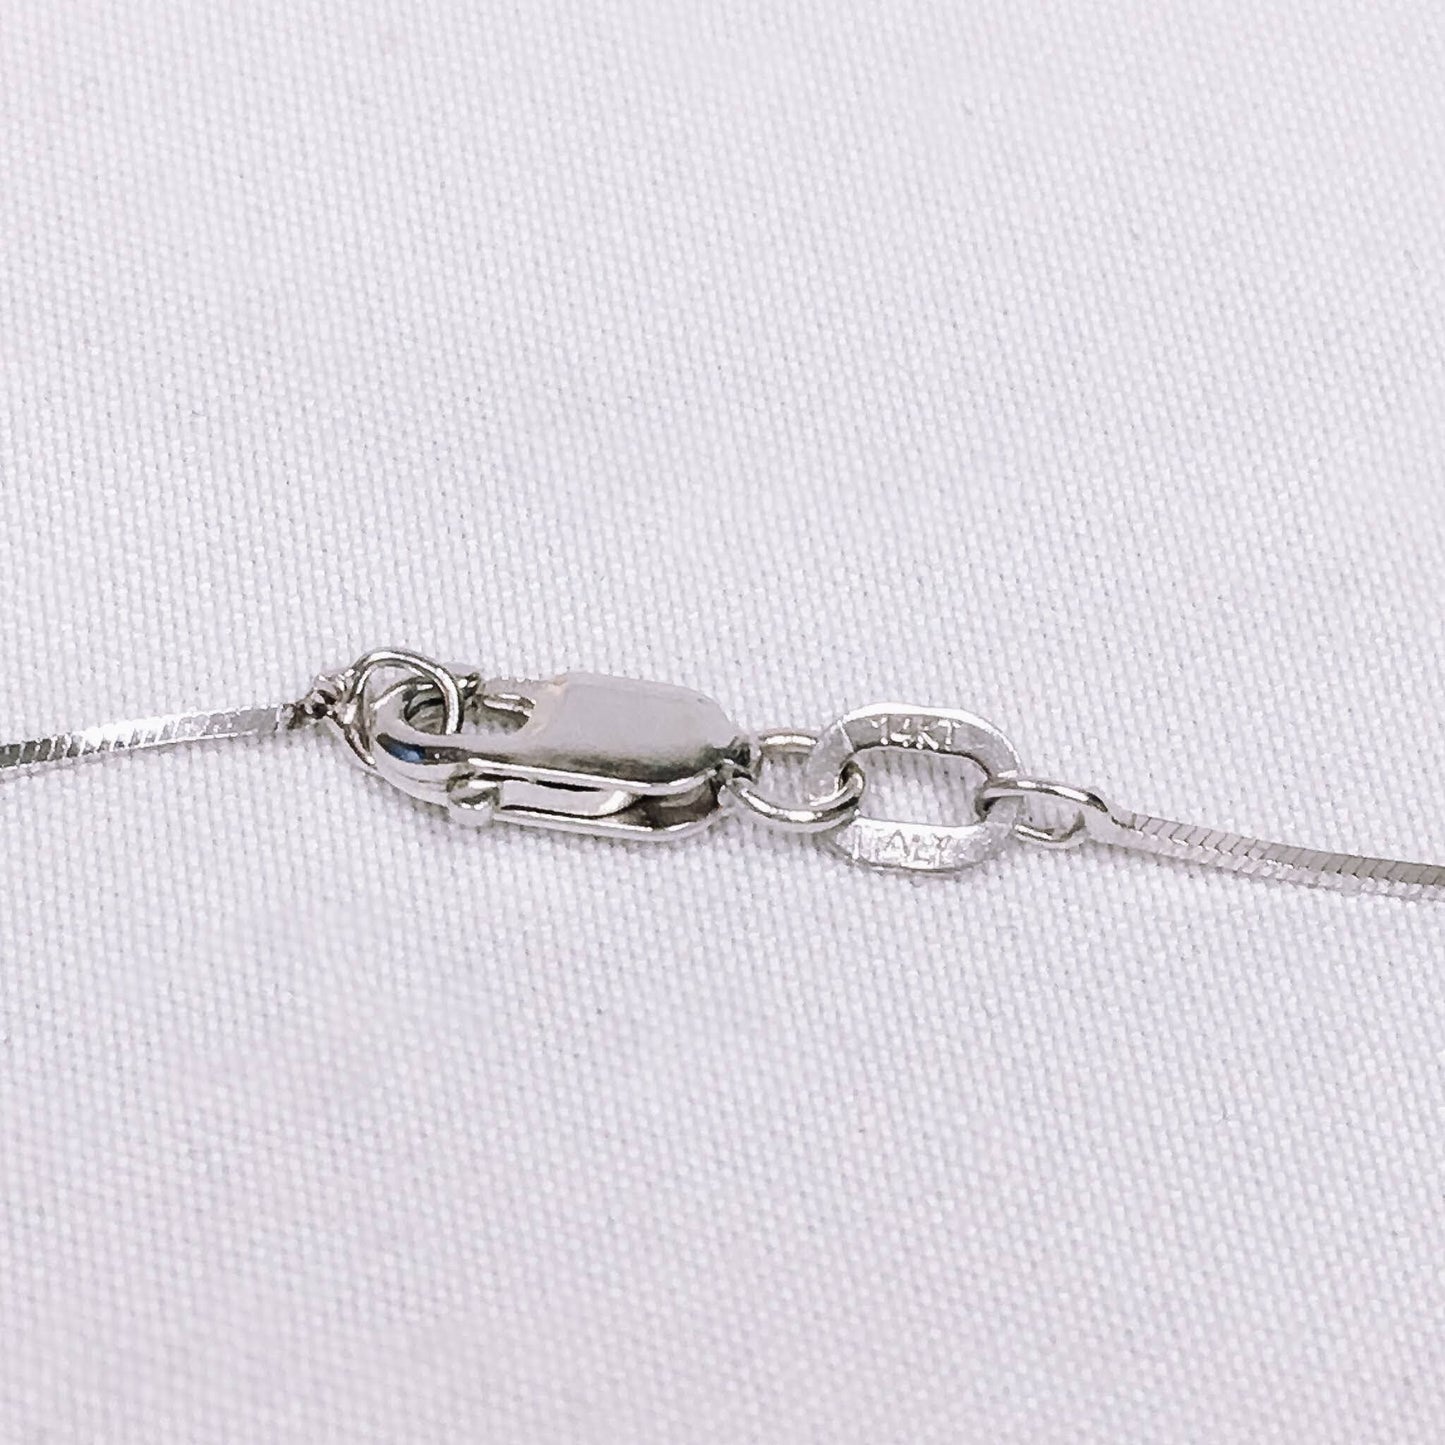 Vintage Marked Italy 14k White Gold Thin Chain Necklace, Simple Dainty Jewelry